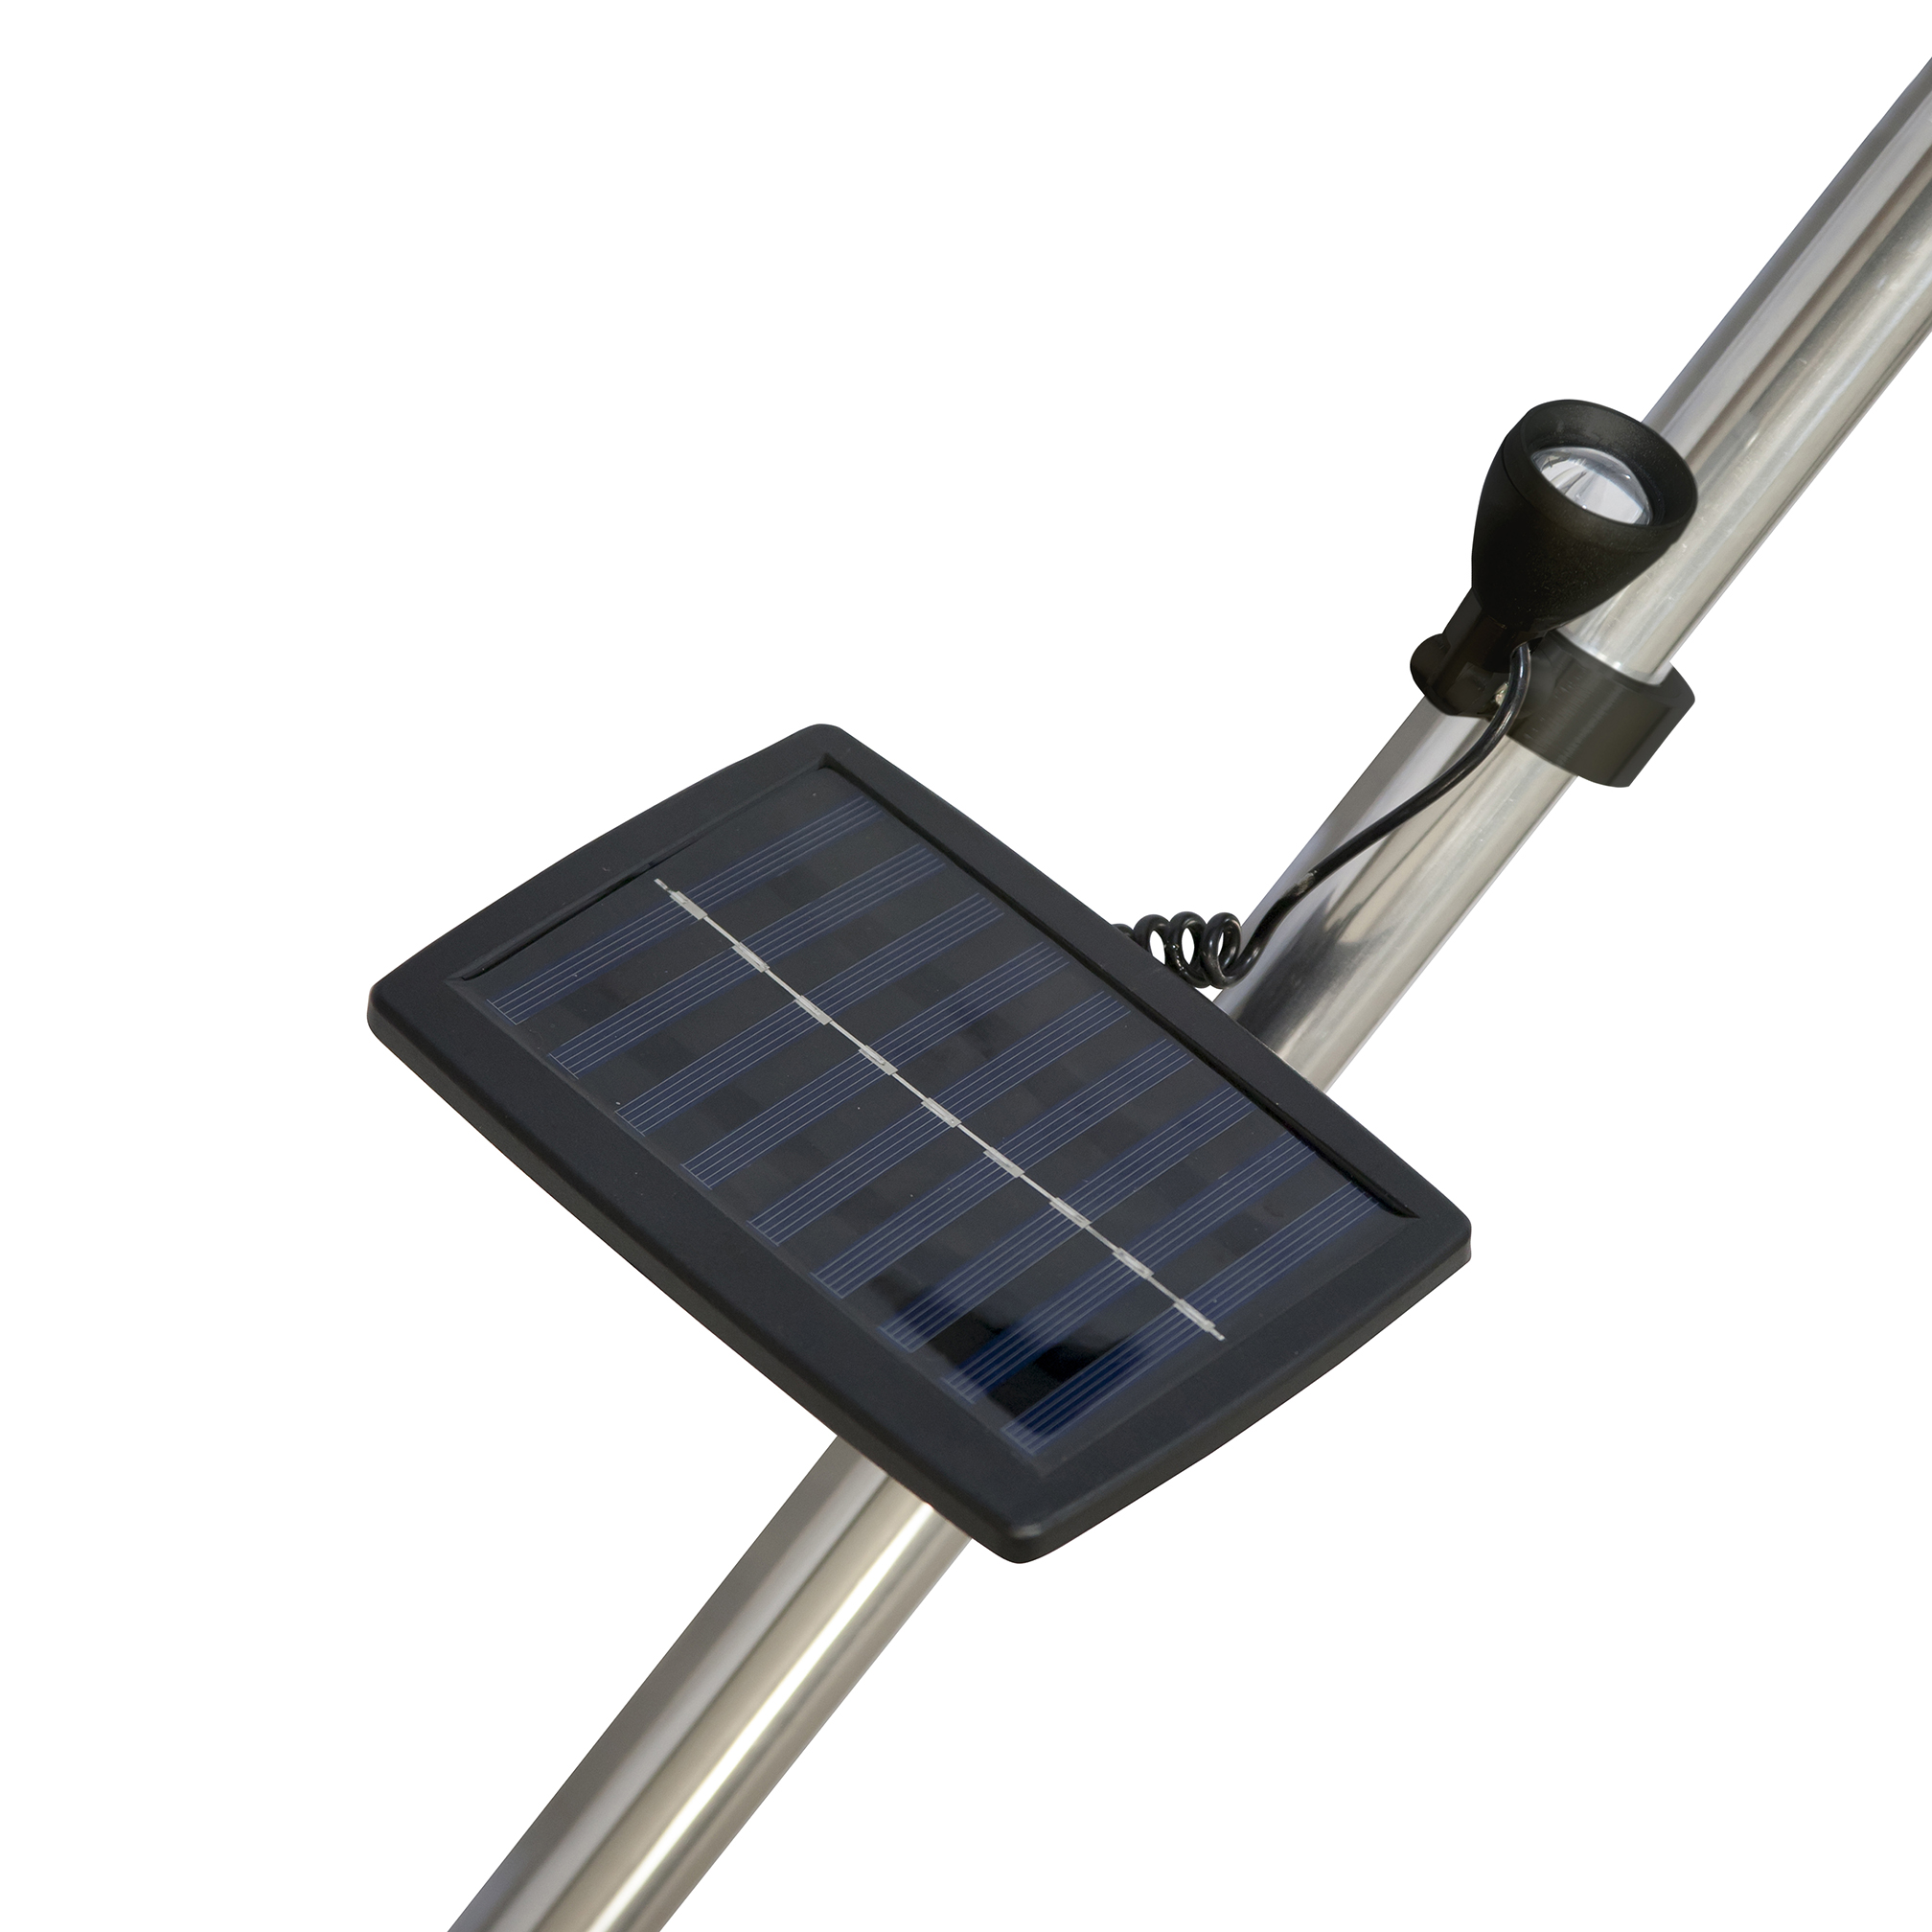 Plastic Solar Flagpole Light for Flags by Valley Forge, Compatible with 1" or 1.25" Flagpole - image 4 of 5